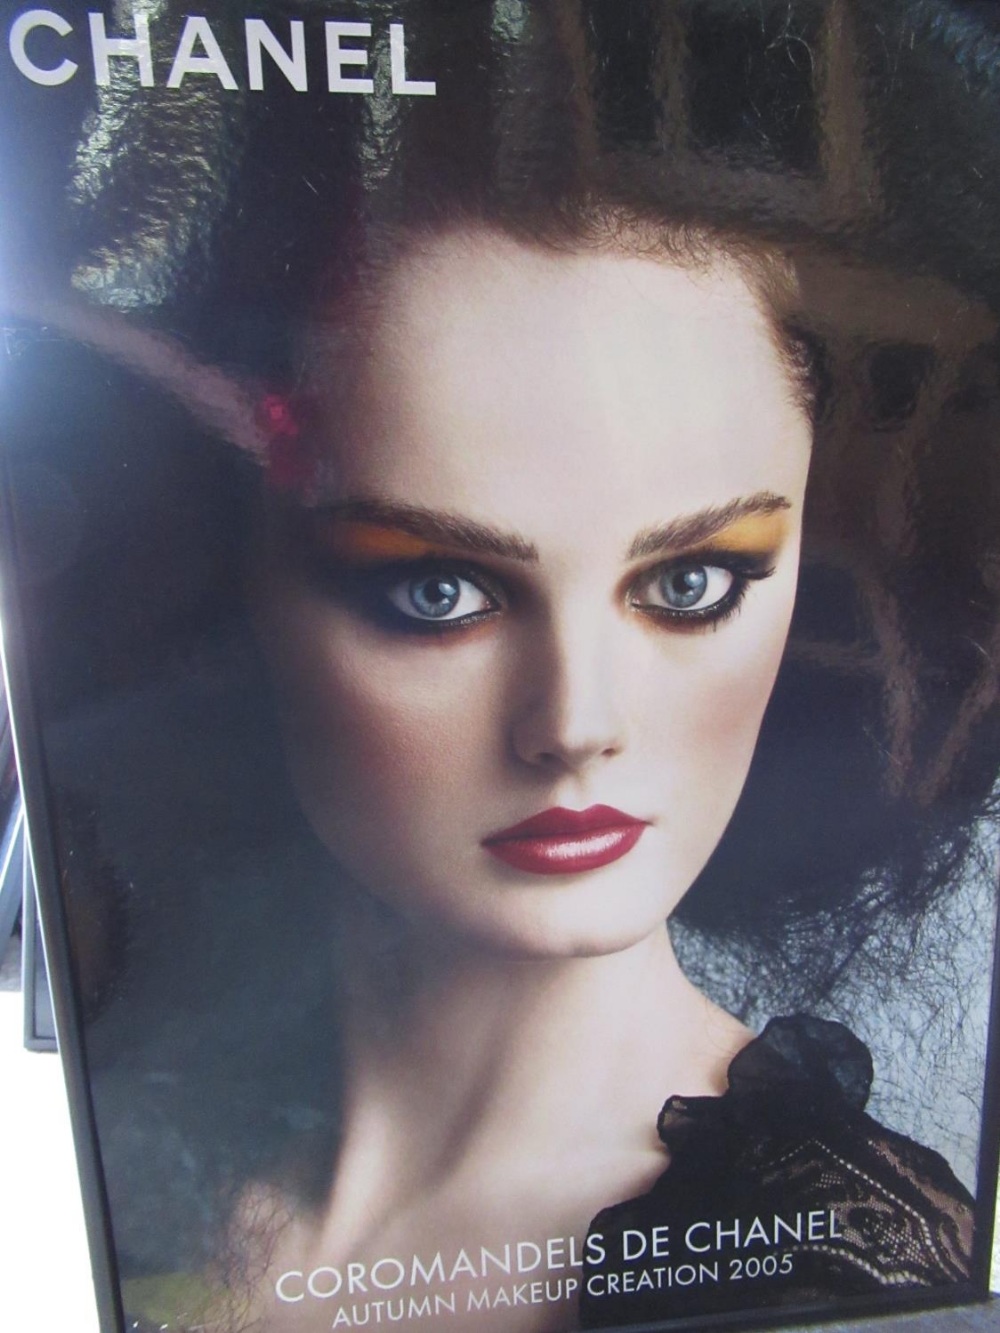 Chanel - three advertising posters for Le Rouge makeup, and another for Coromandels de Chanel Autumn - Image 3 of 5